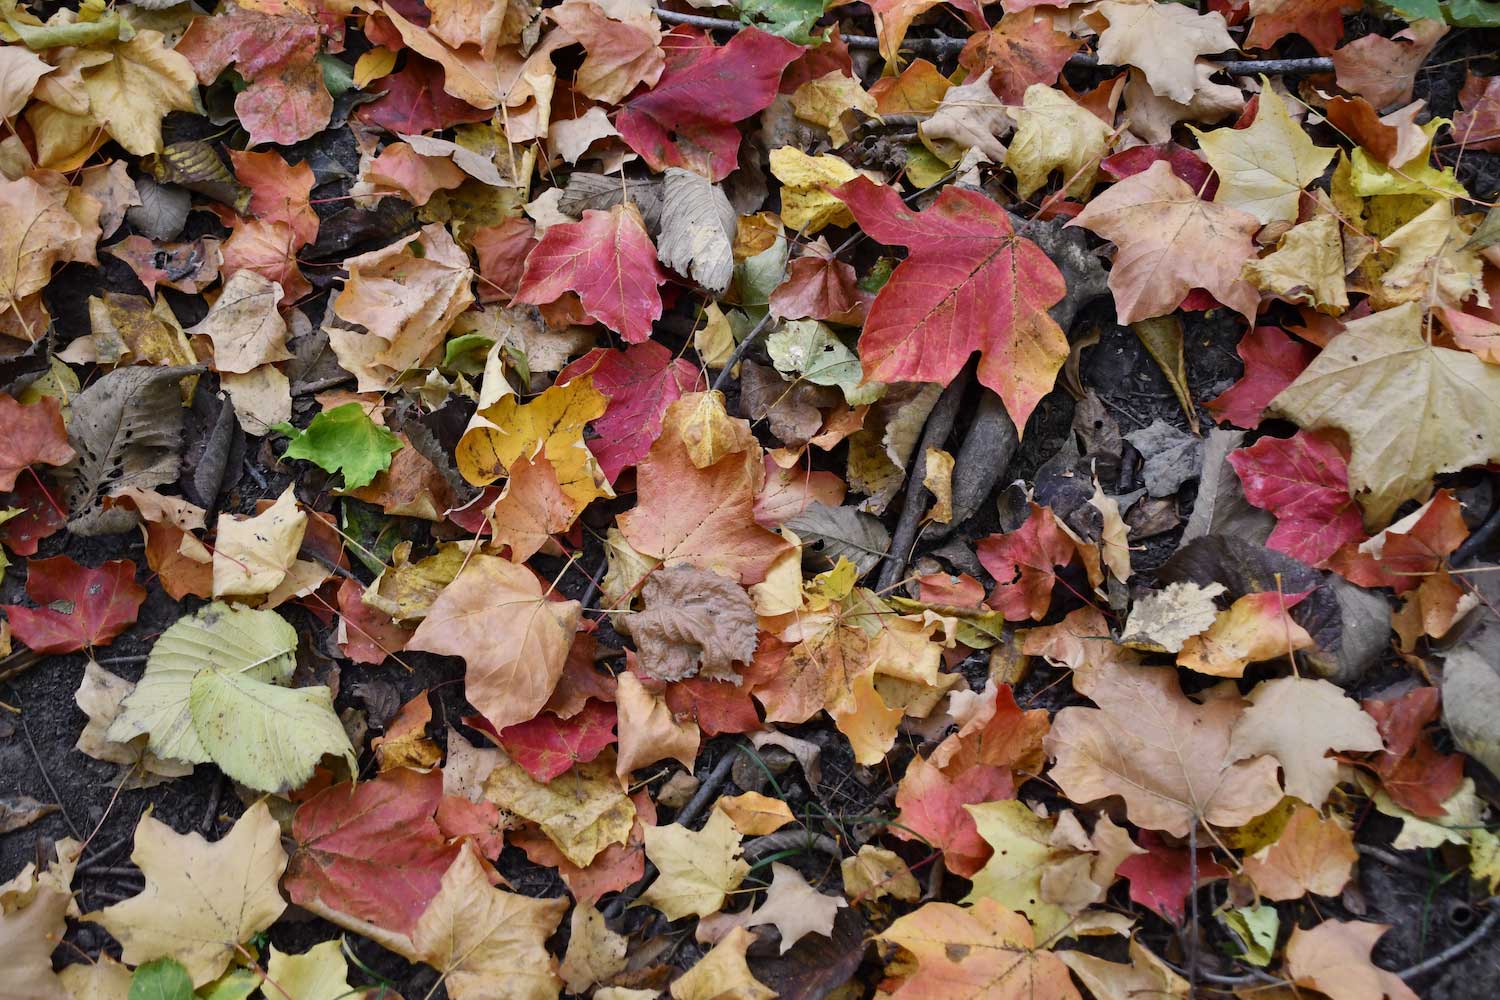 A collection of red, yellow and brown fall leaves on the ground.